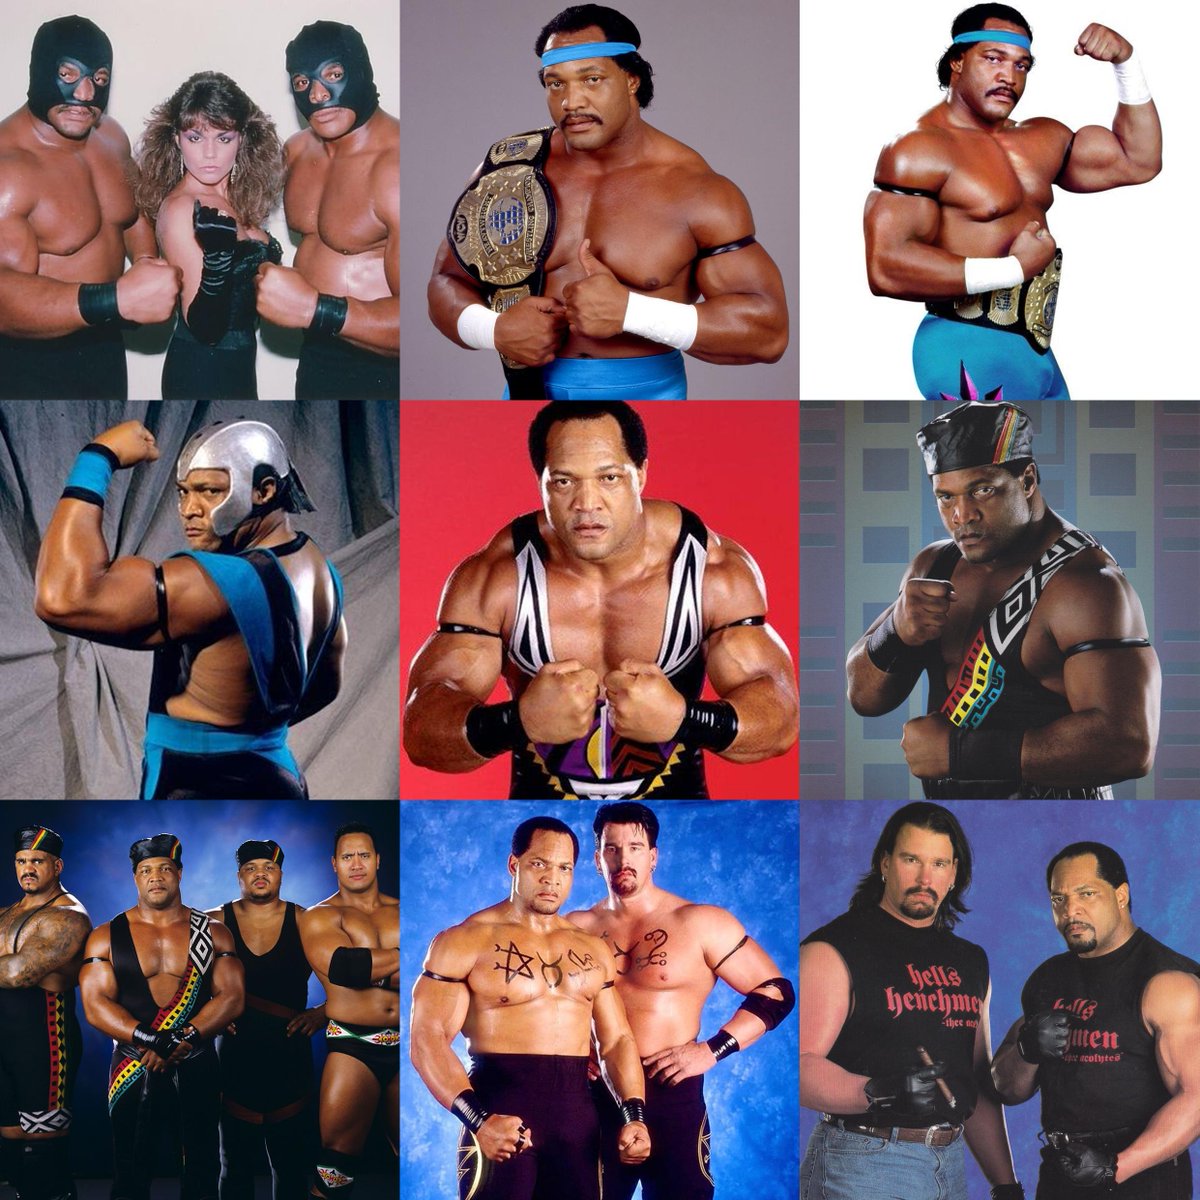 Happy Birthday to Ron Simmons! 🥂 #WWF #WWE #Wrestling #RonSimmons